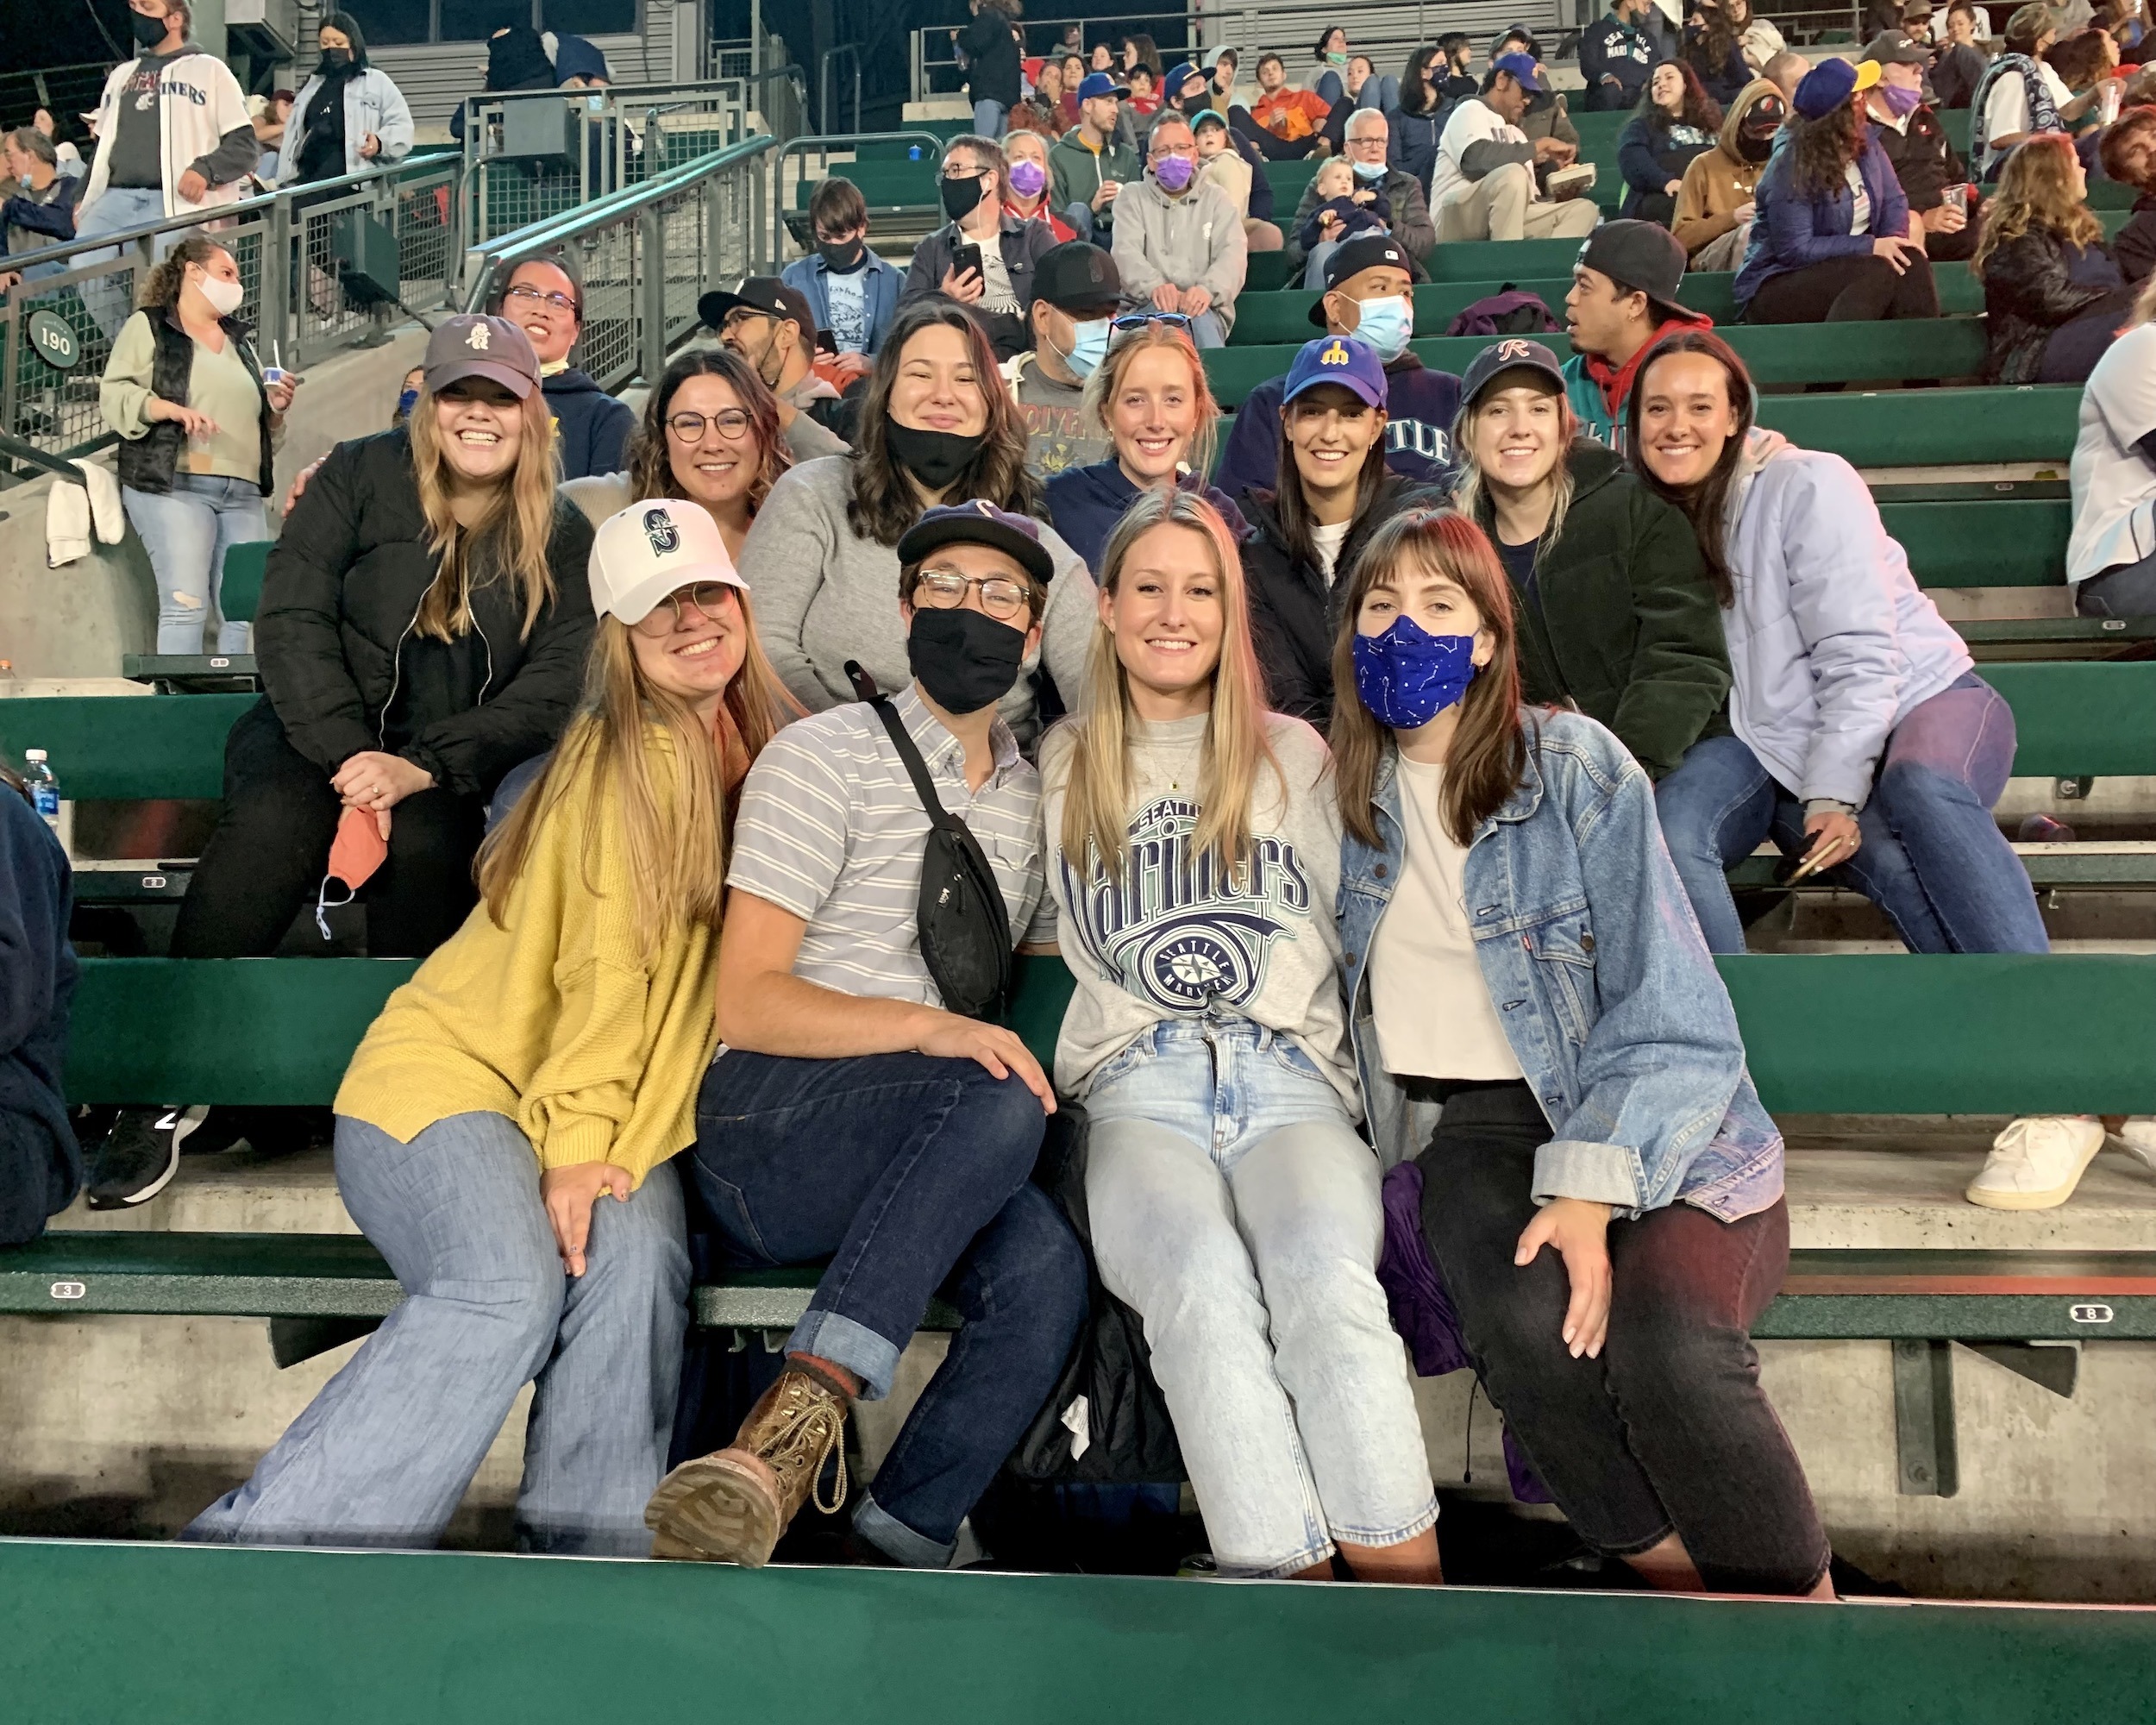 Walker Sands Mariners game outing